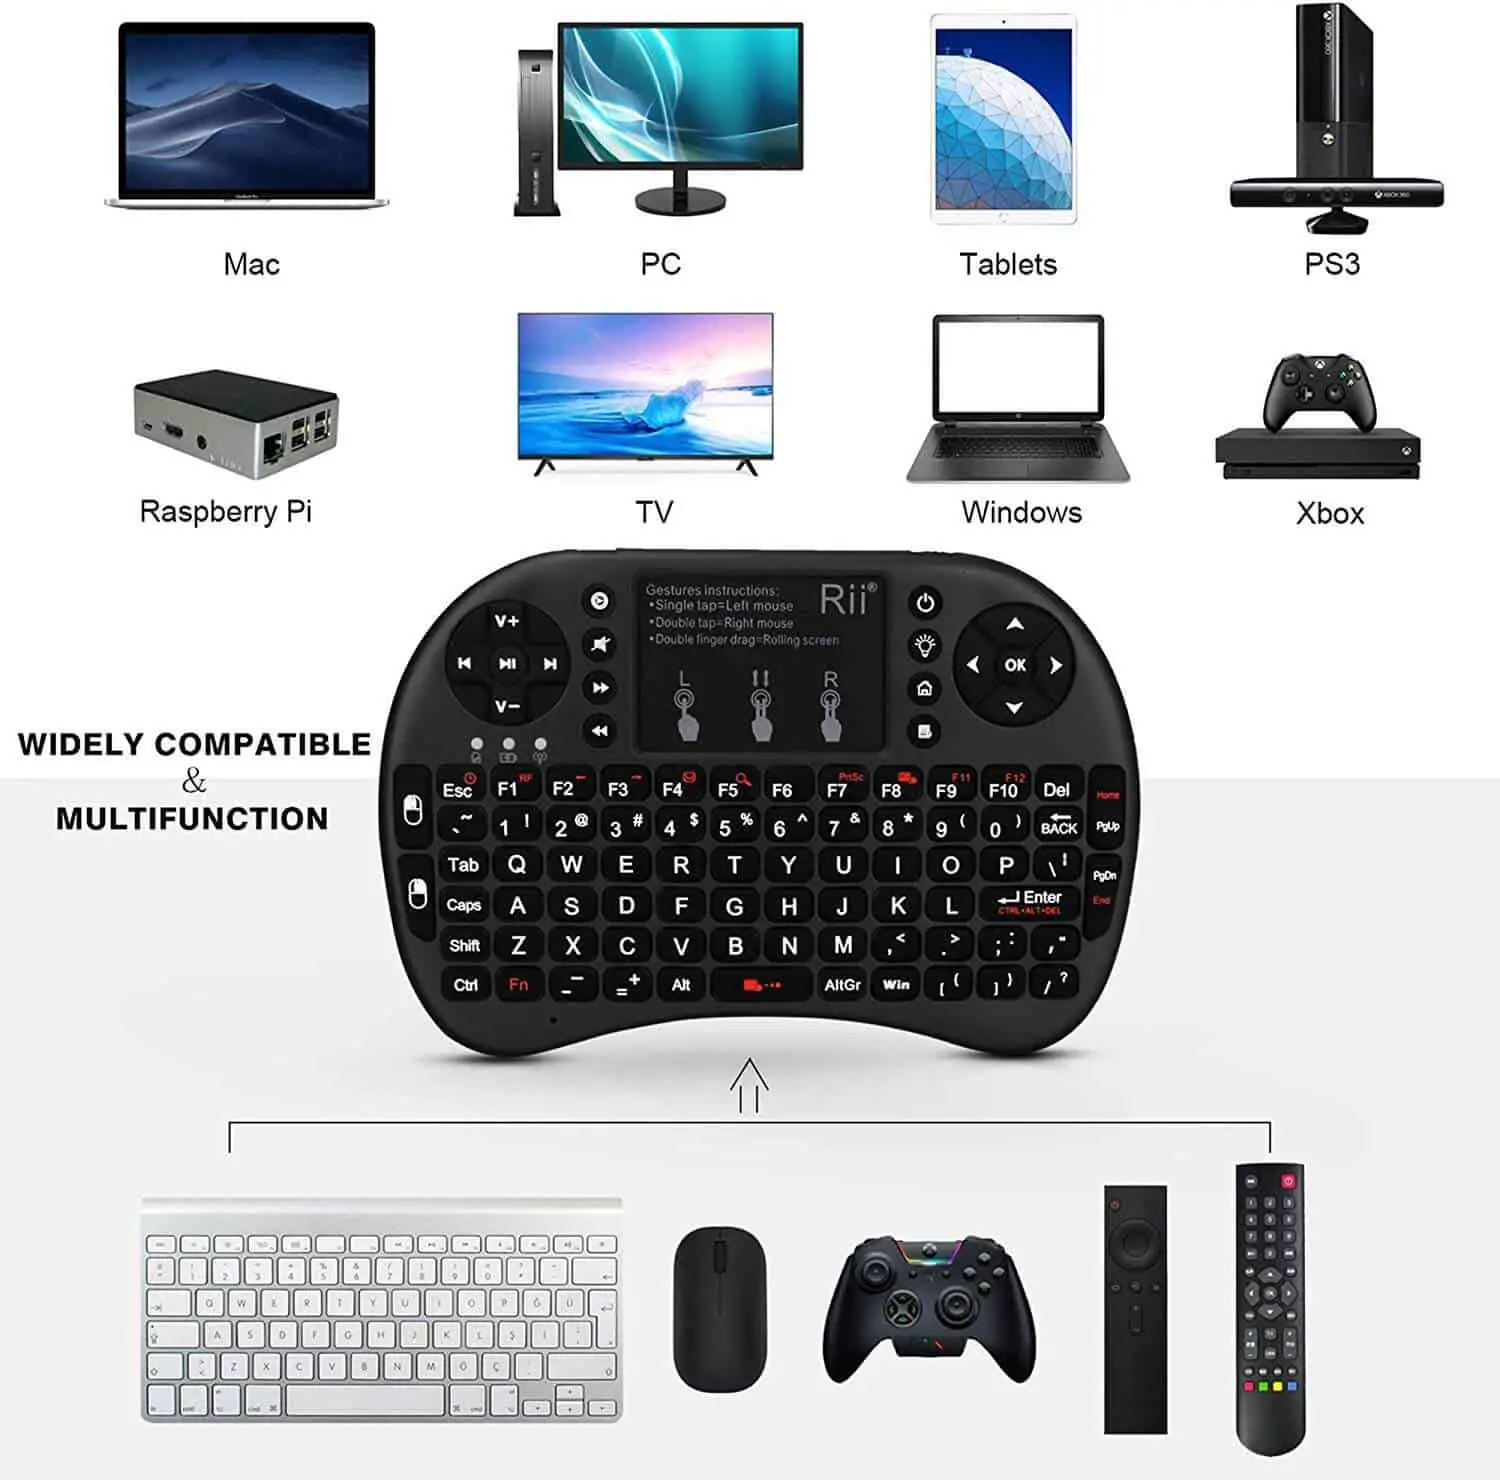 Multimedia keyboards for different electronics.